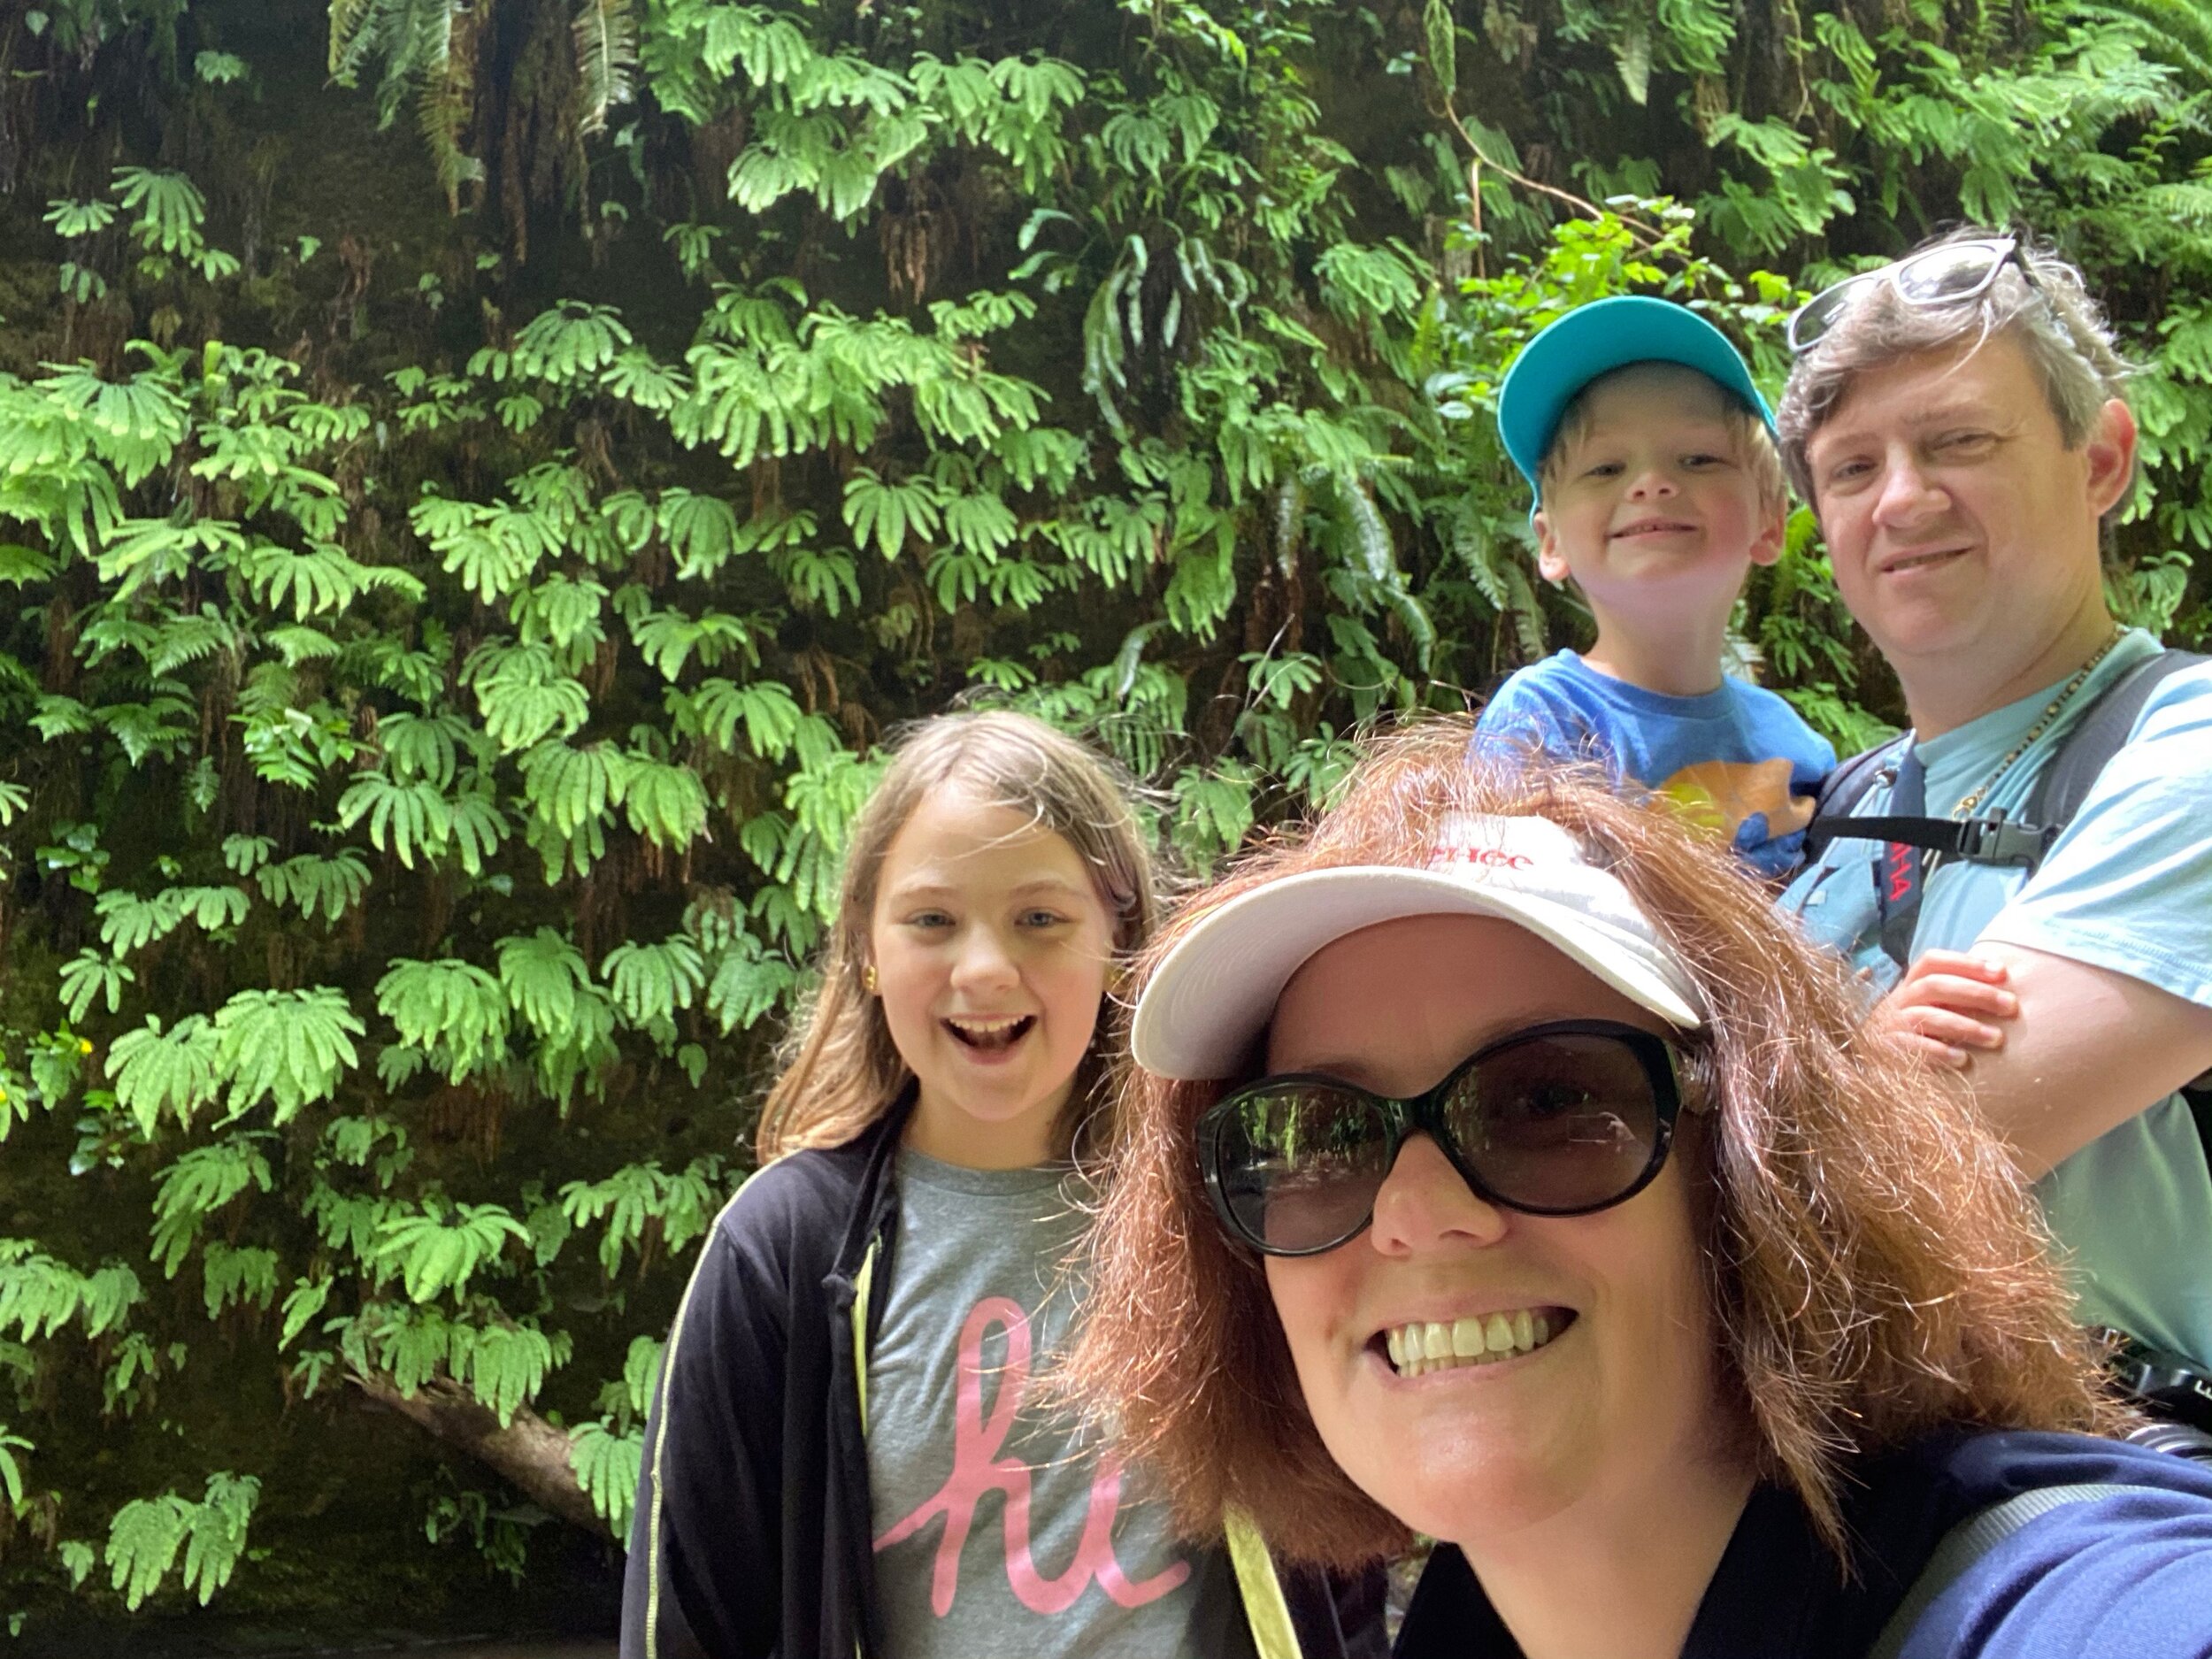 Our family at Fern Canyon, Redwood National Park